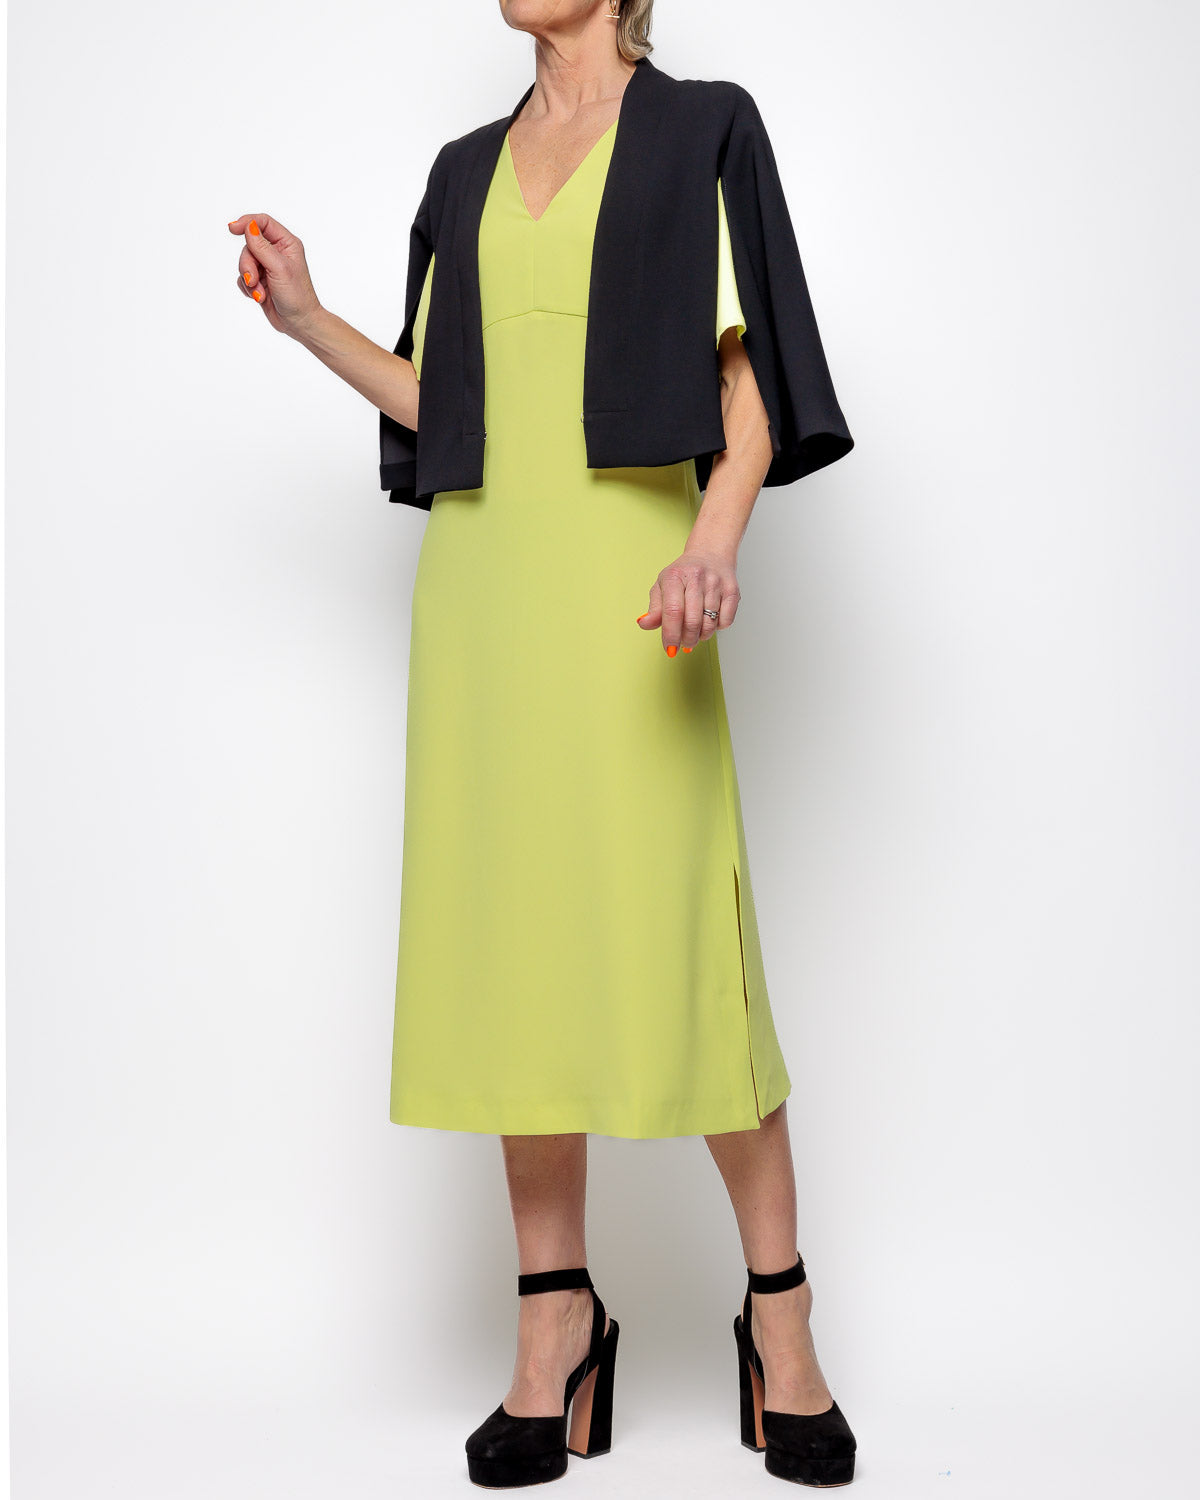 Emme Marella Whist Dress in Citrus Yellow